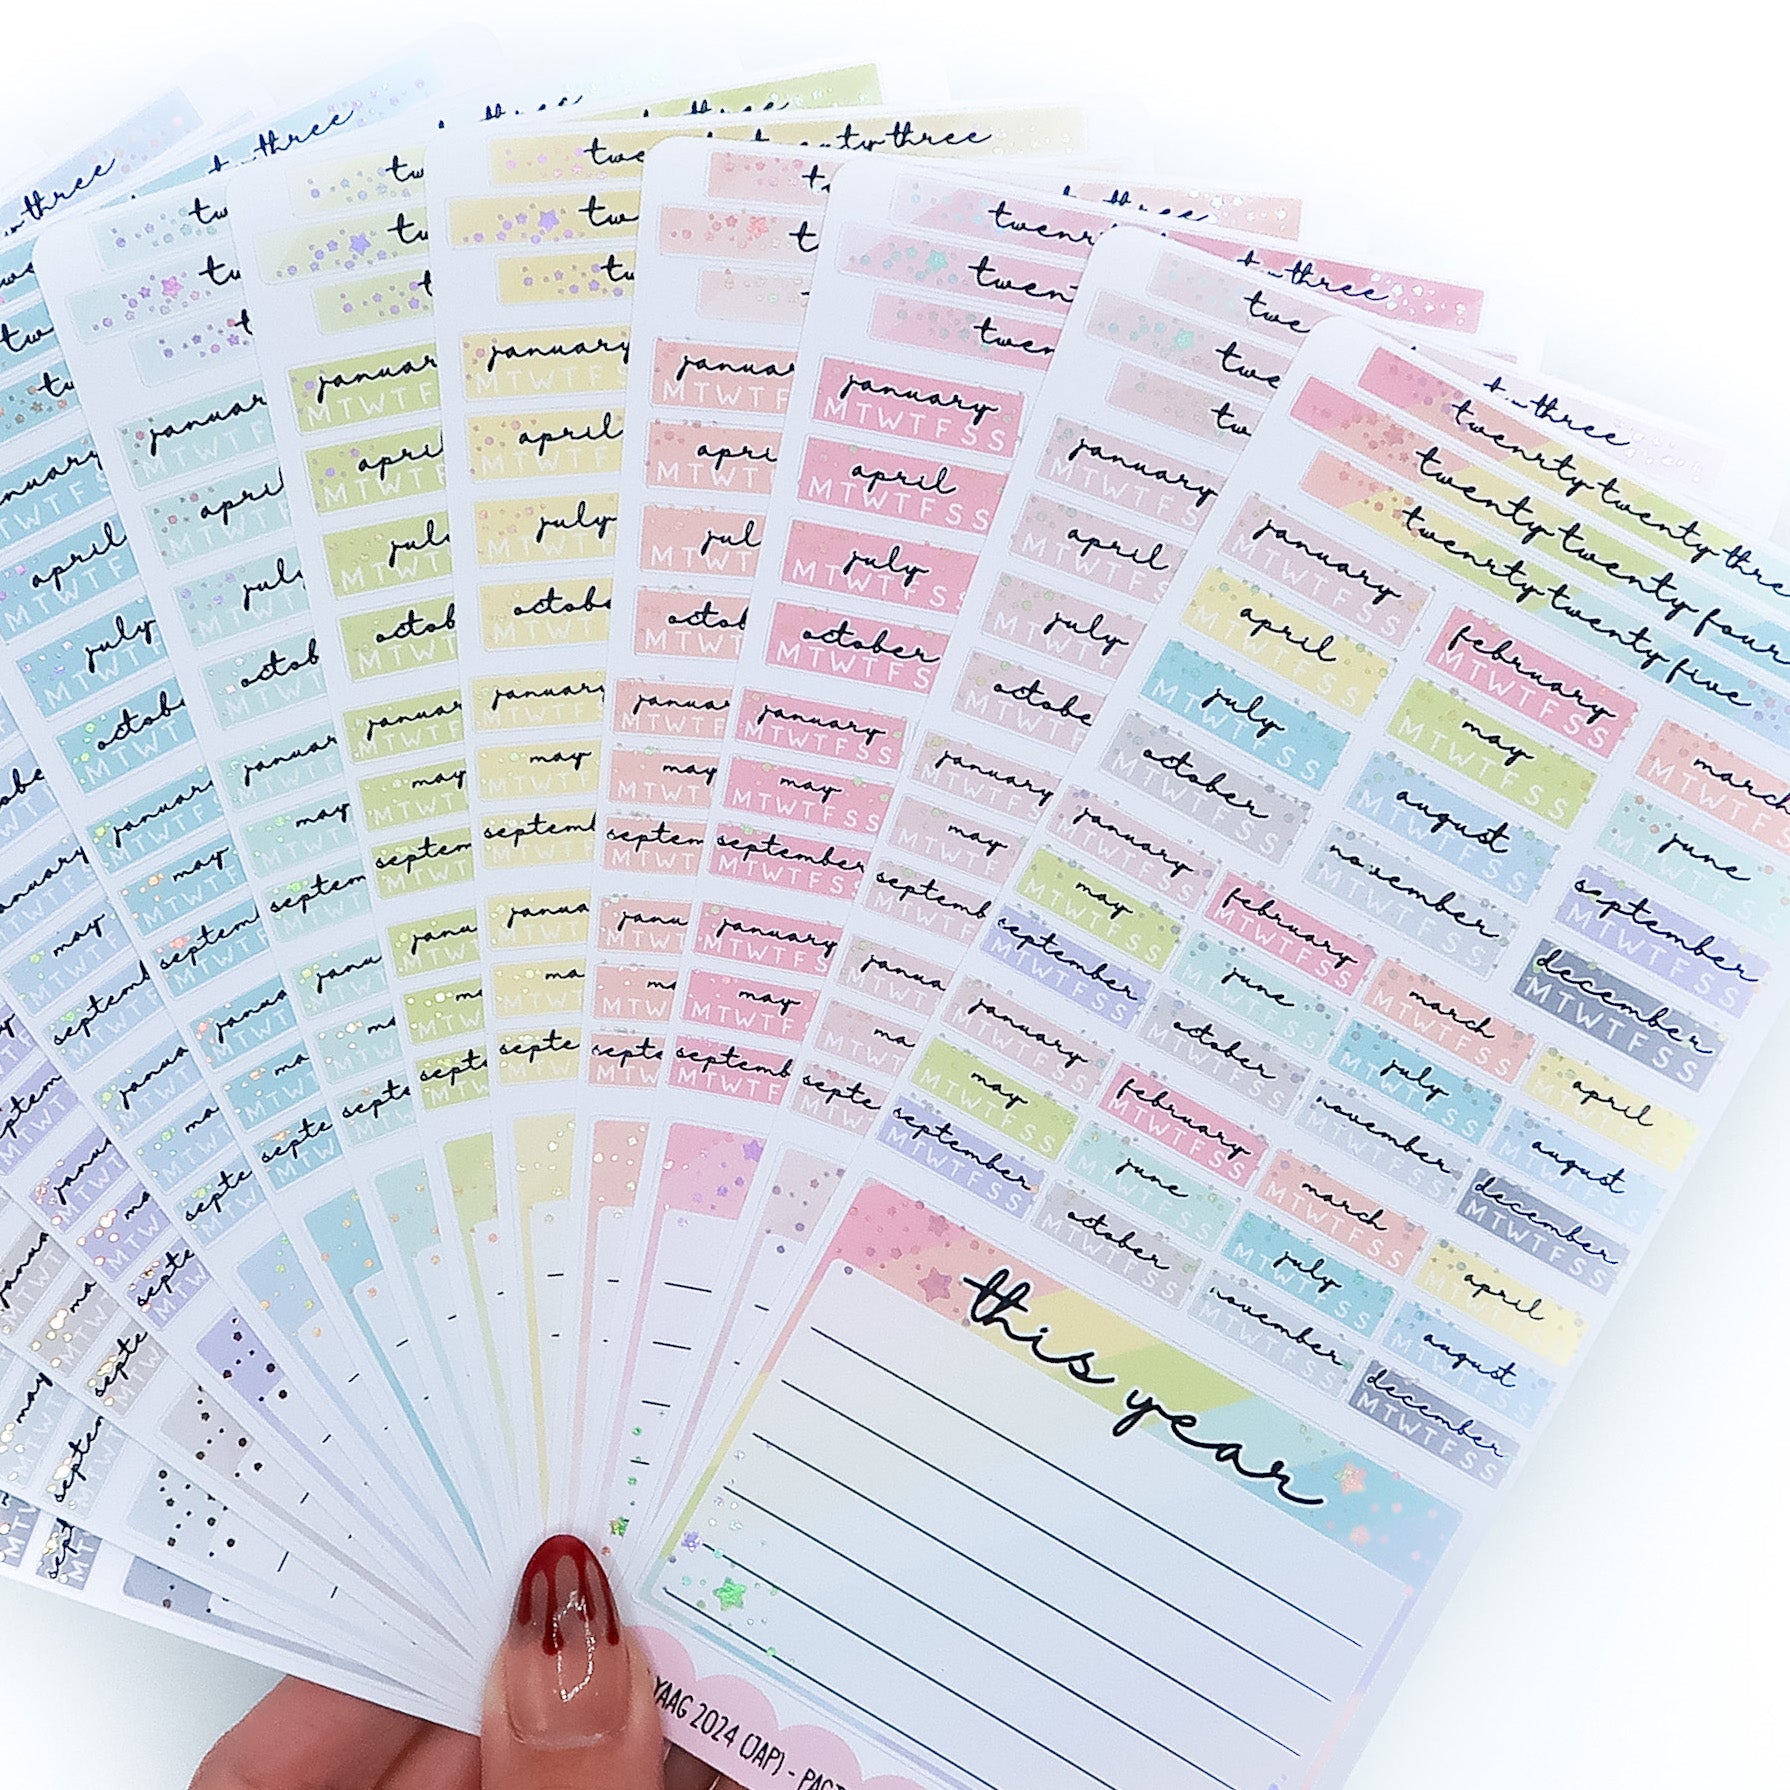 Picking Your Perfect Hobonichi Planner